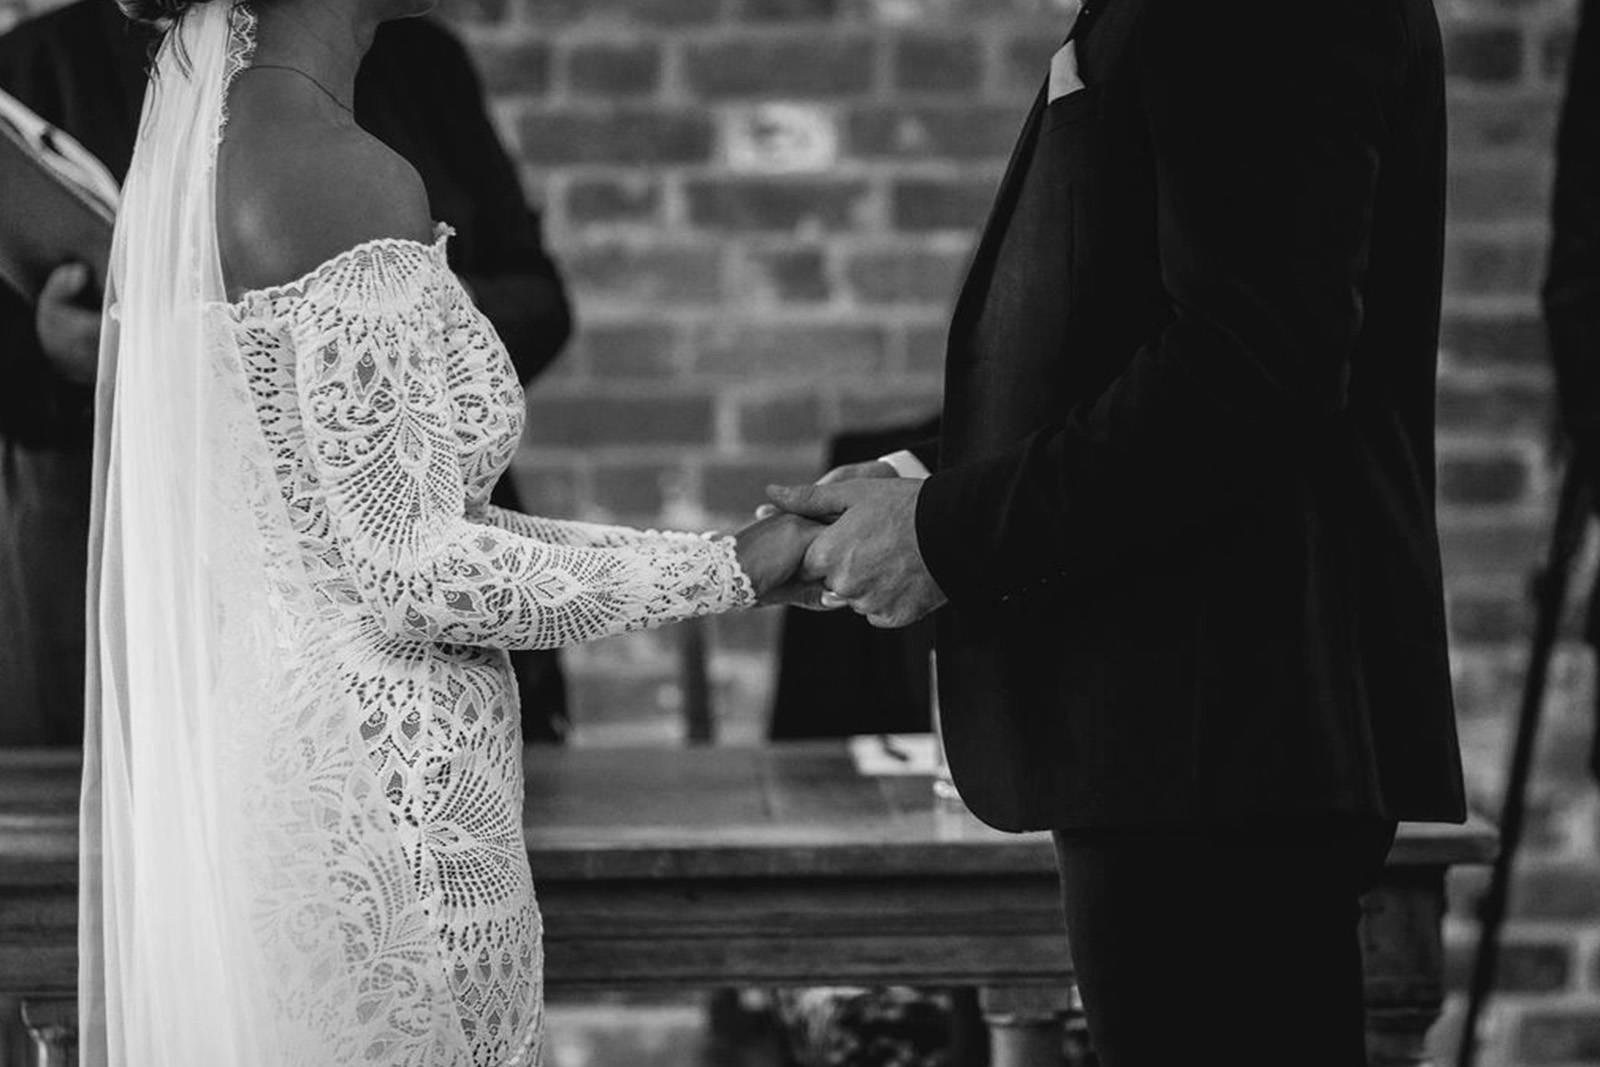 Groom and bride in the nathalia lace gown